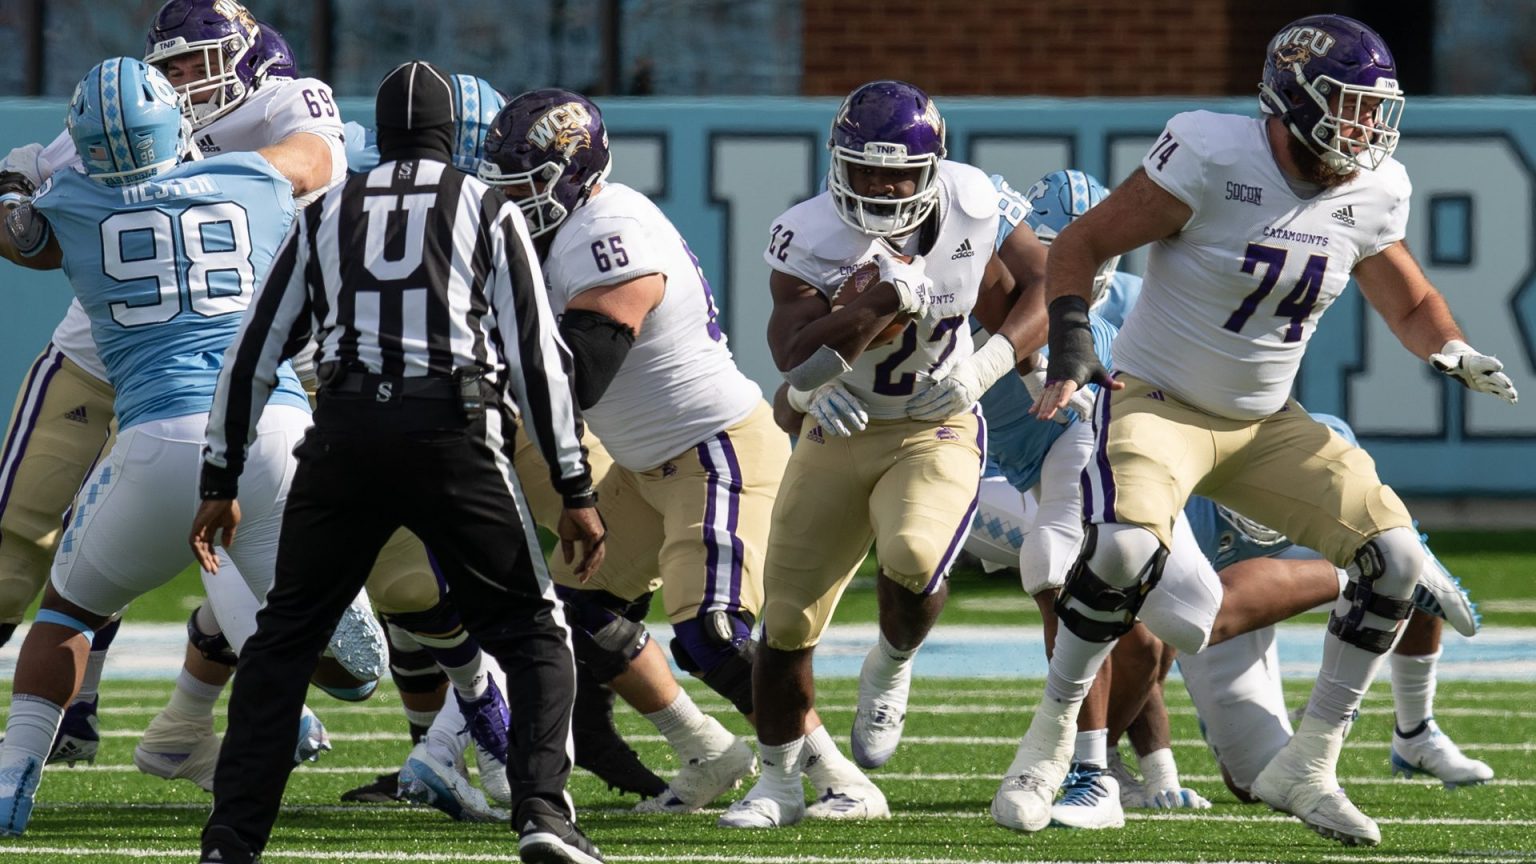 2021 Fcs Season Preview Western Carolina The College Sports Journal 7555